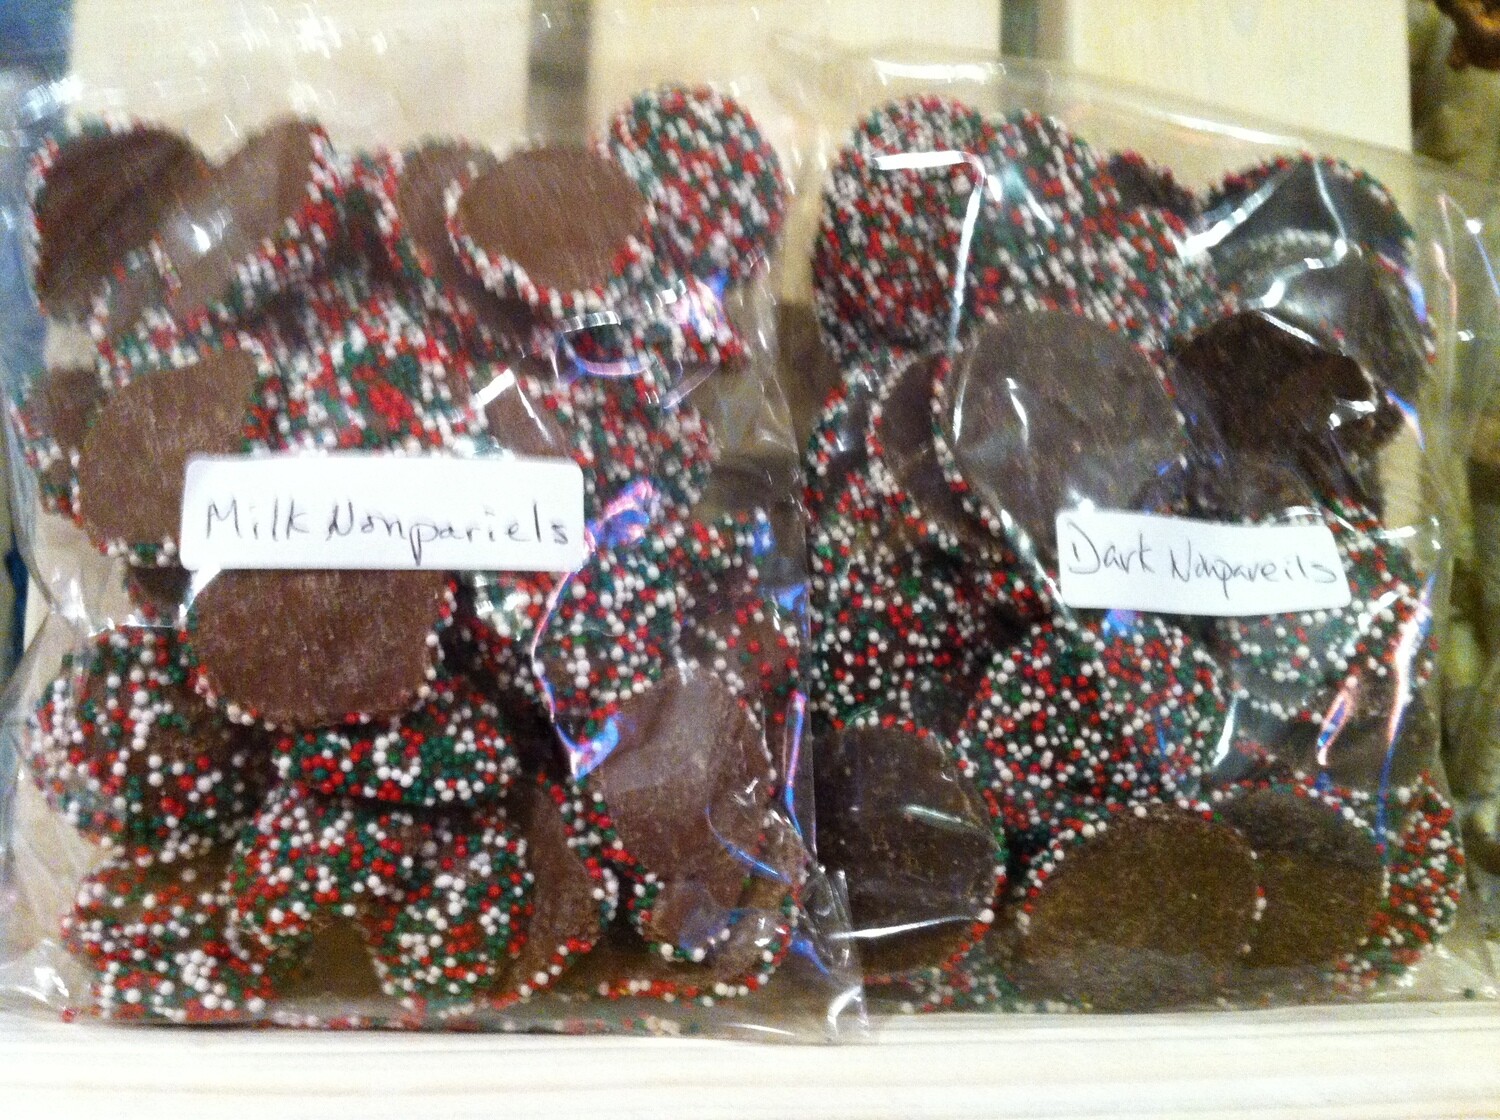 Nopareils: Check Out all the Flavors!